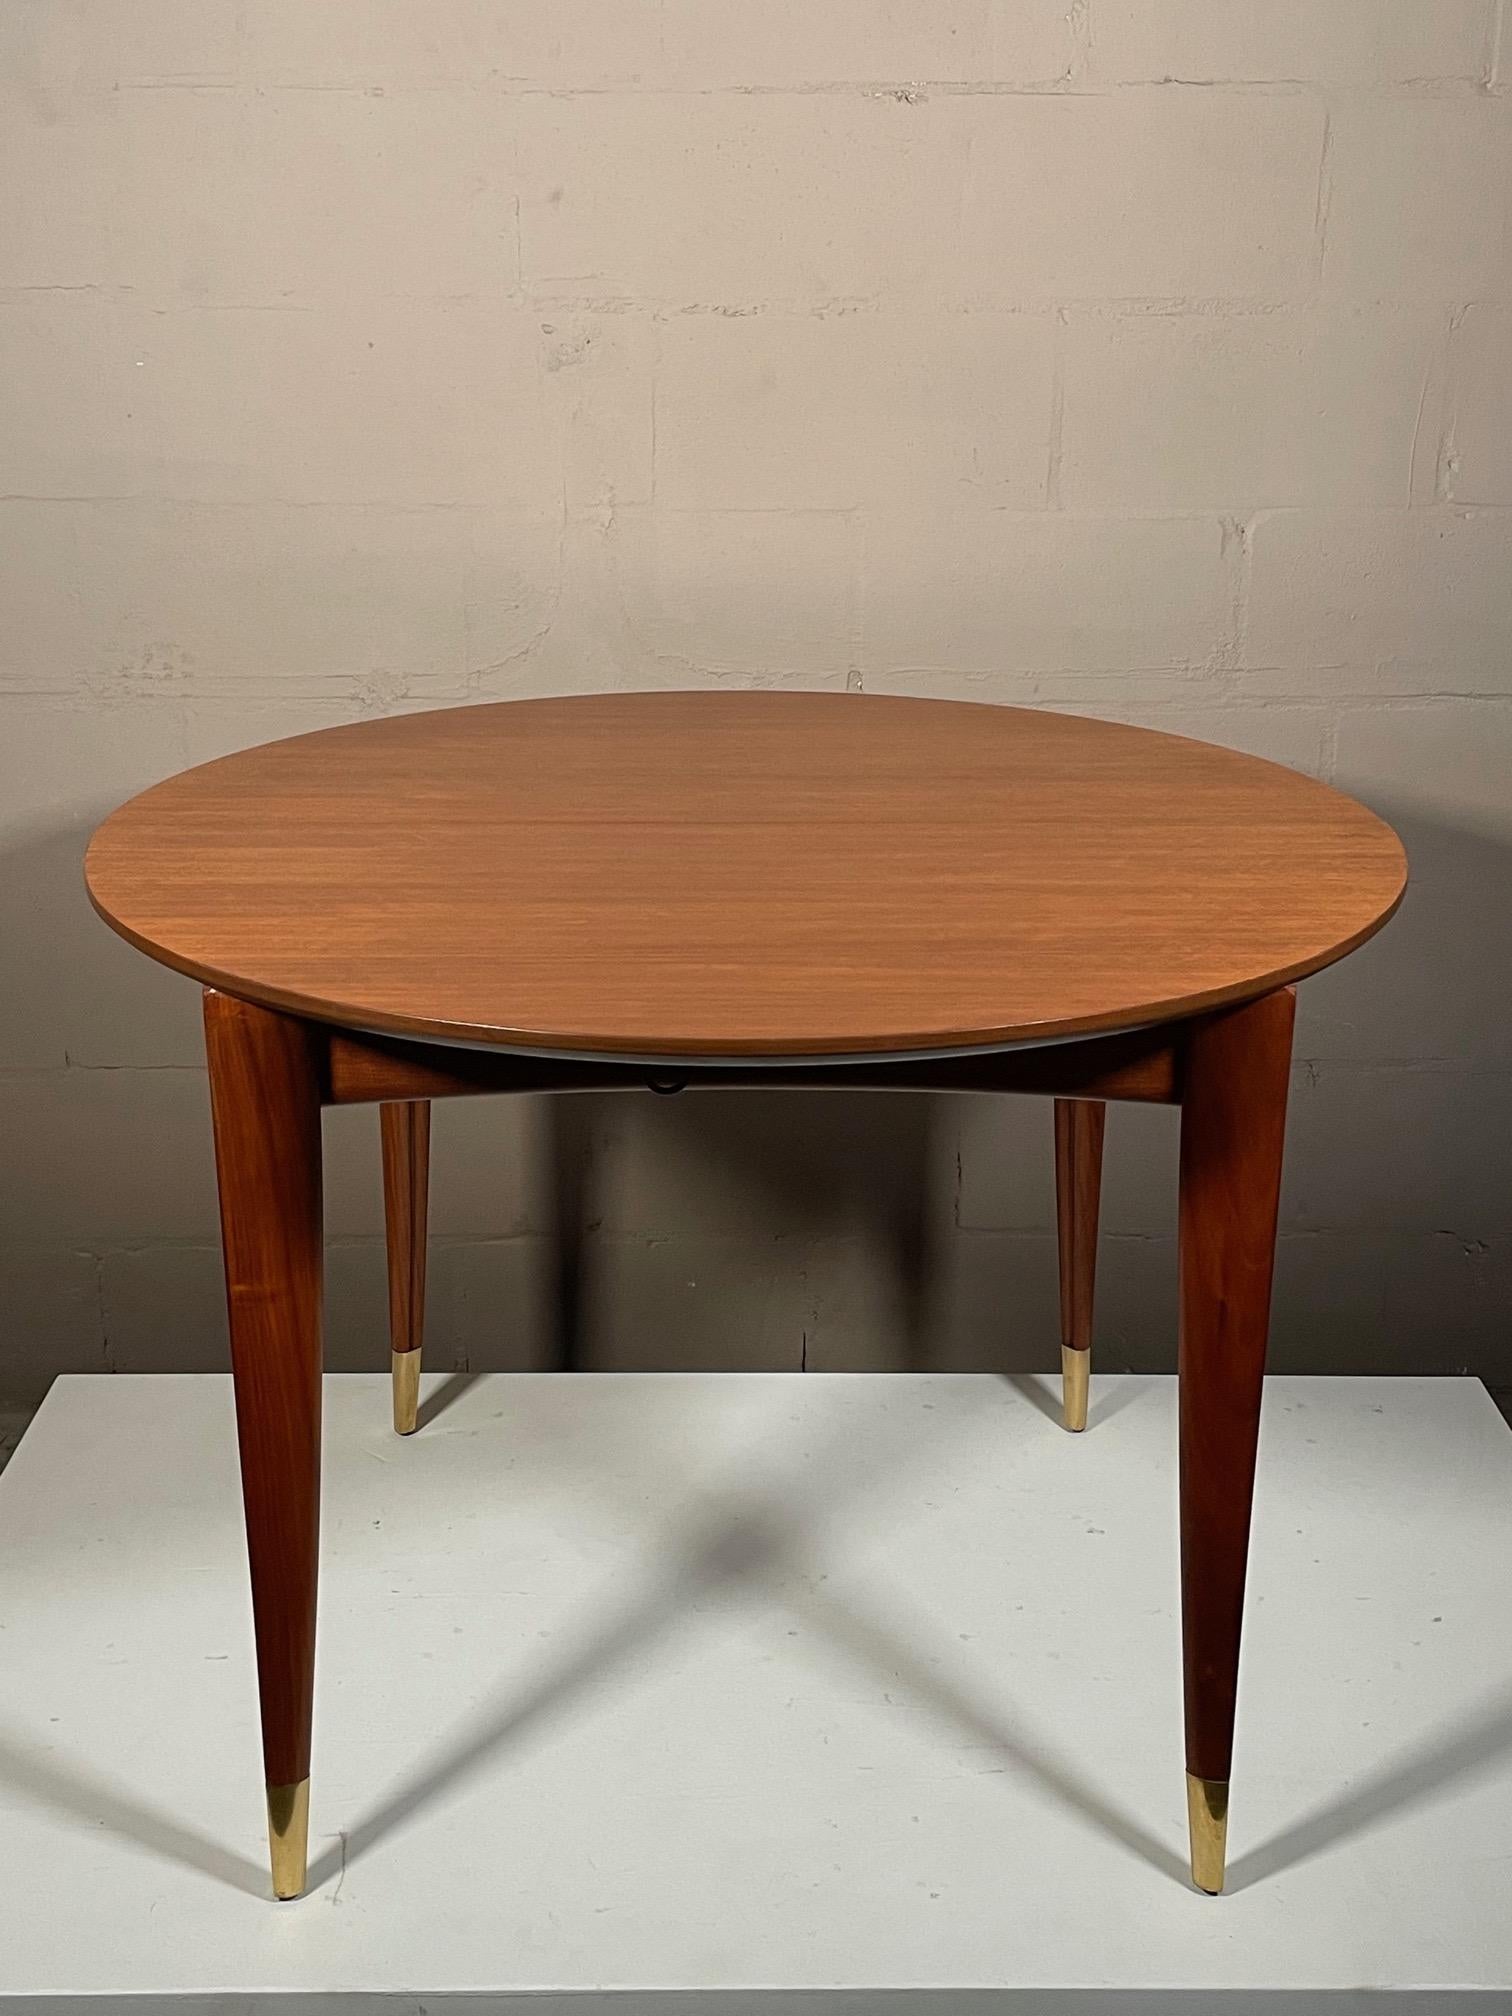 A classic small scale dining table designed by Gio Ponti for SInger&sons and made ca' 1950's. Measuring 40